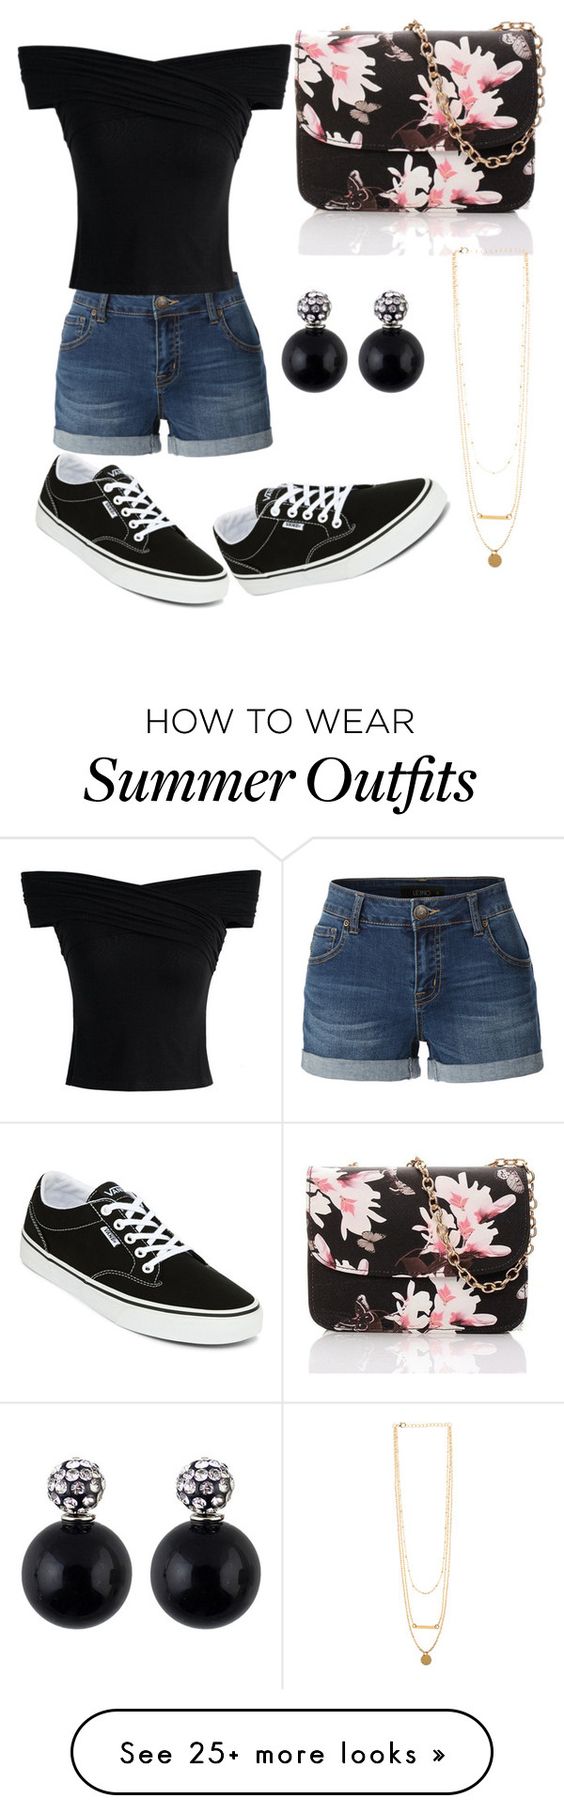 Casual Outfits For Girls: 10 Outfit Ideas With Shorts